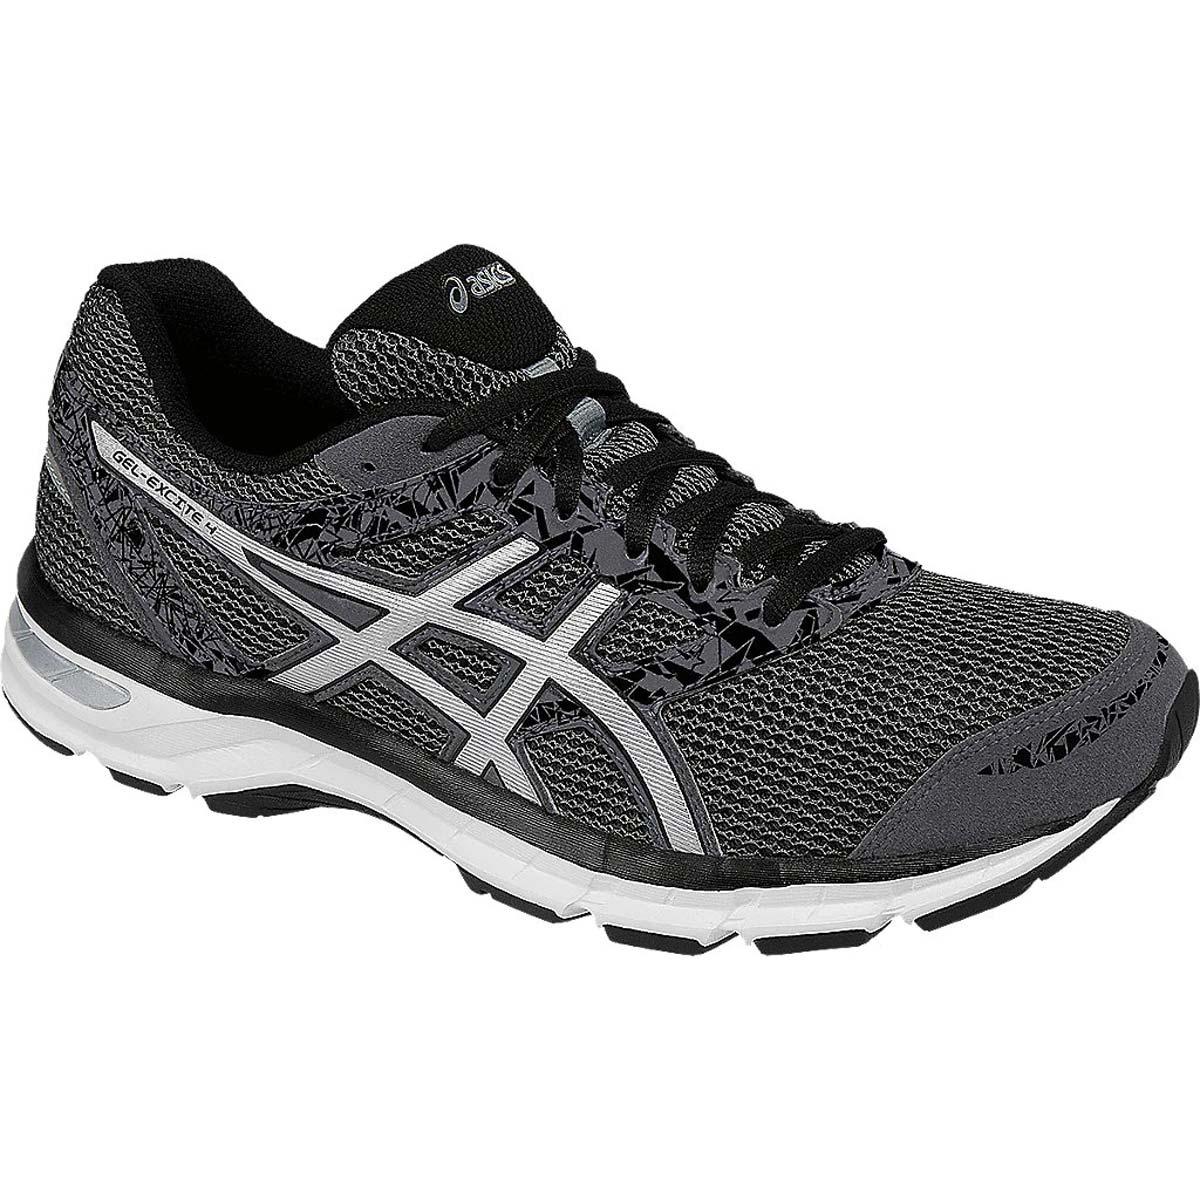 físico plan Contar Buy Asics Gel-Excite 4 Running Shoes (Blue/Silver/Black) Online